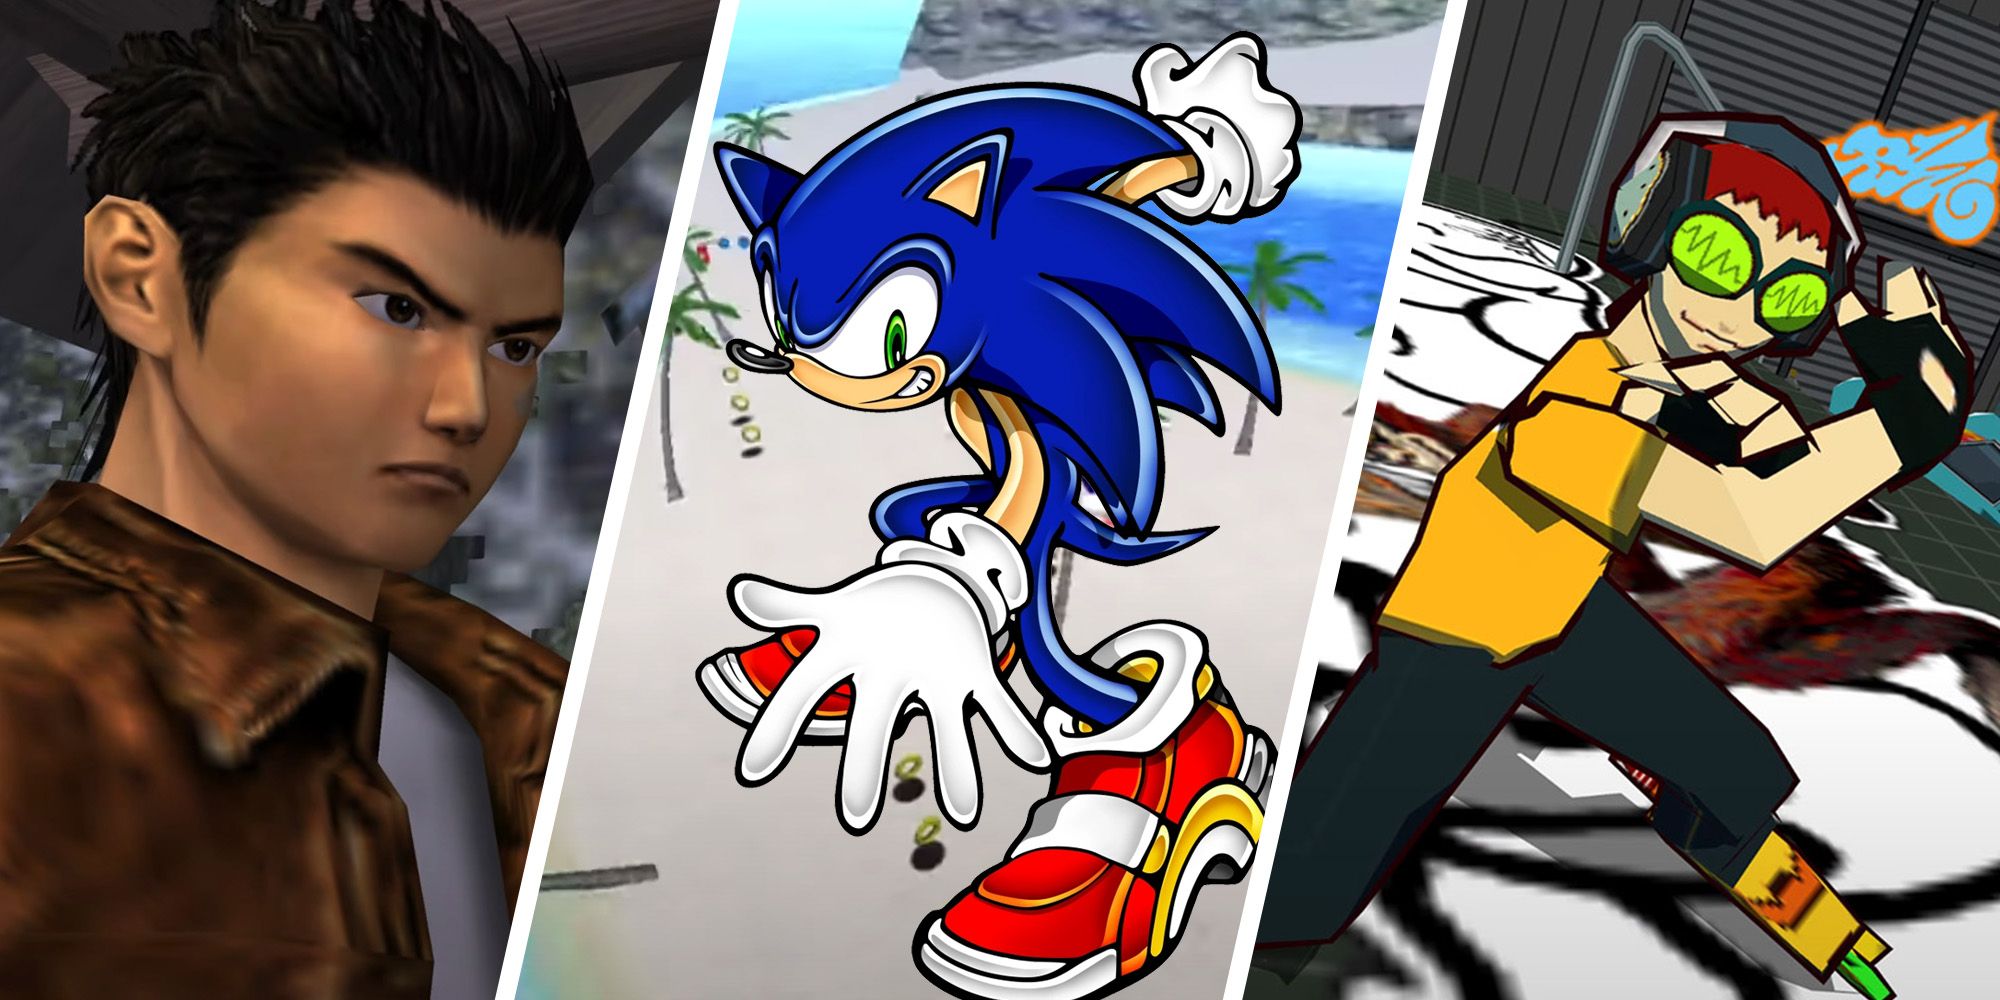 The Best Dreamcast Games Of All Time - Split image of Shenmue, Sonic Adventure, and Jet Set Radio